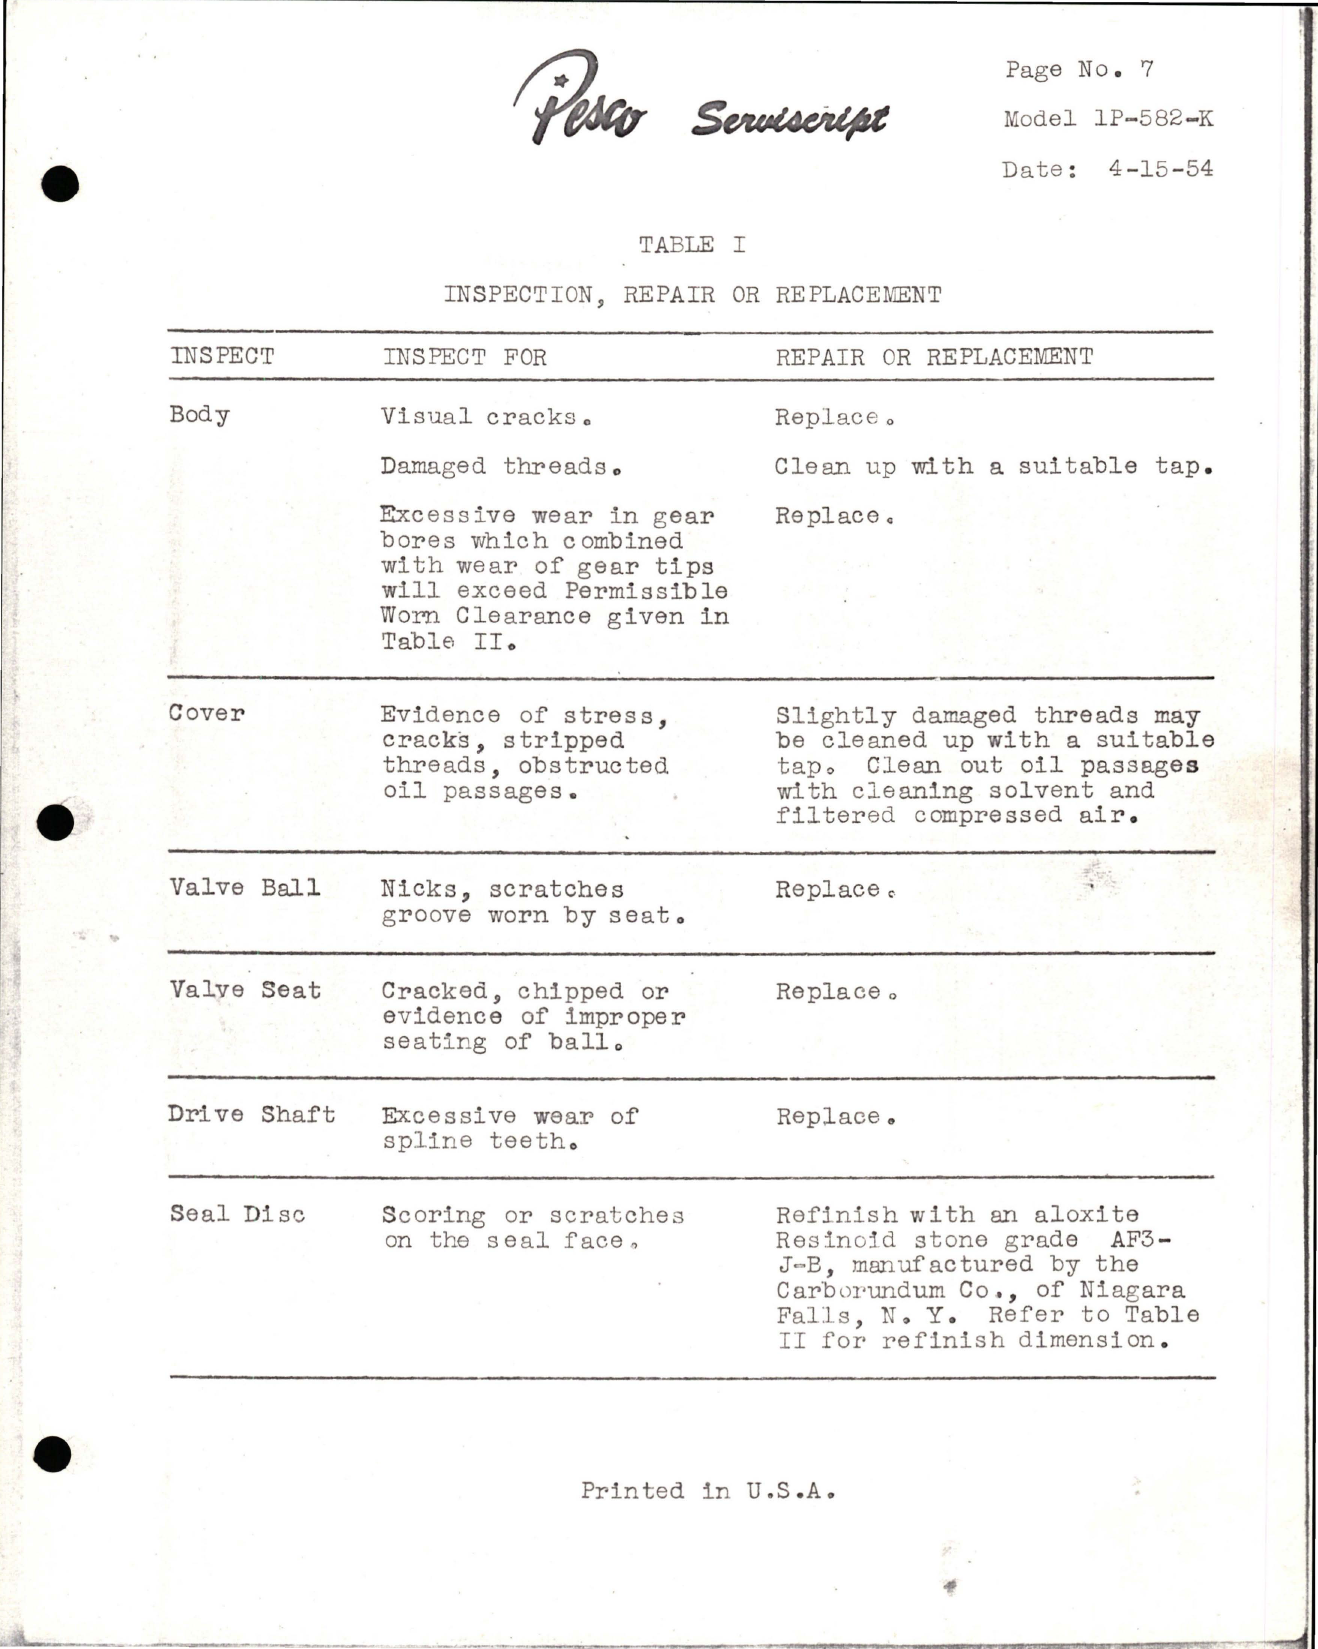 Sample page 7 from AirCorps Library document: Pesco Serviscript Maintenance and Overhaul Instructions with Test Procedures for Hydraulic Gear Pump - Model 1P-582-K